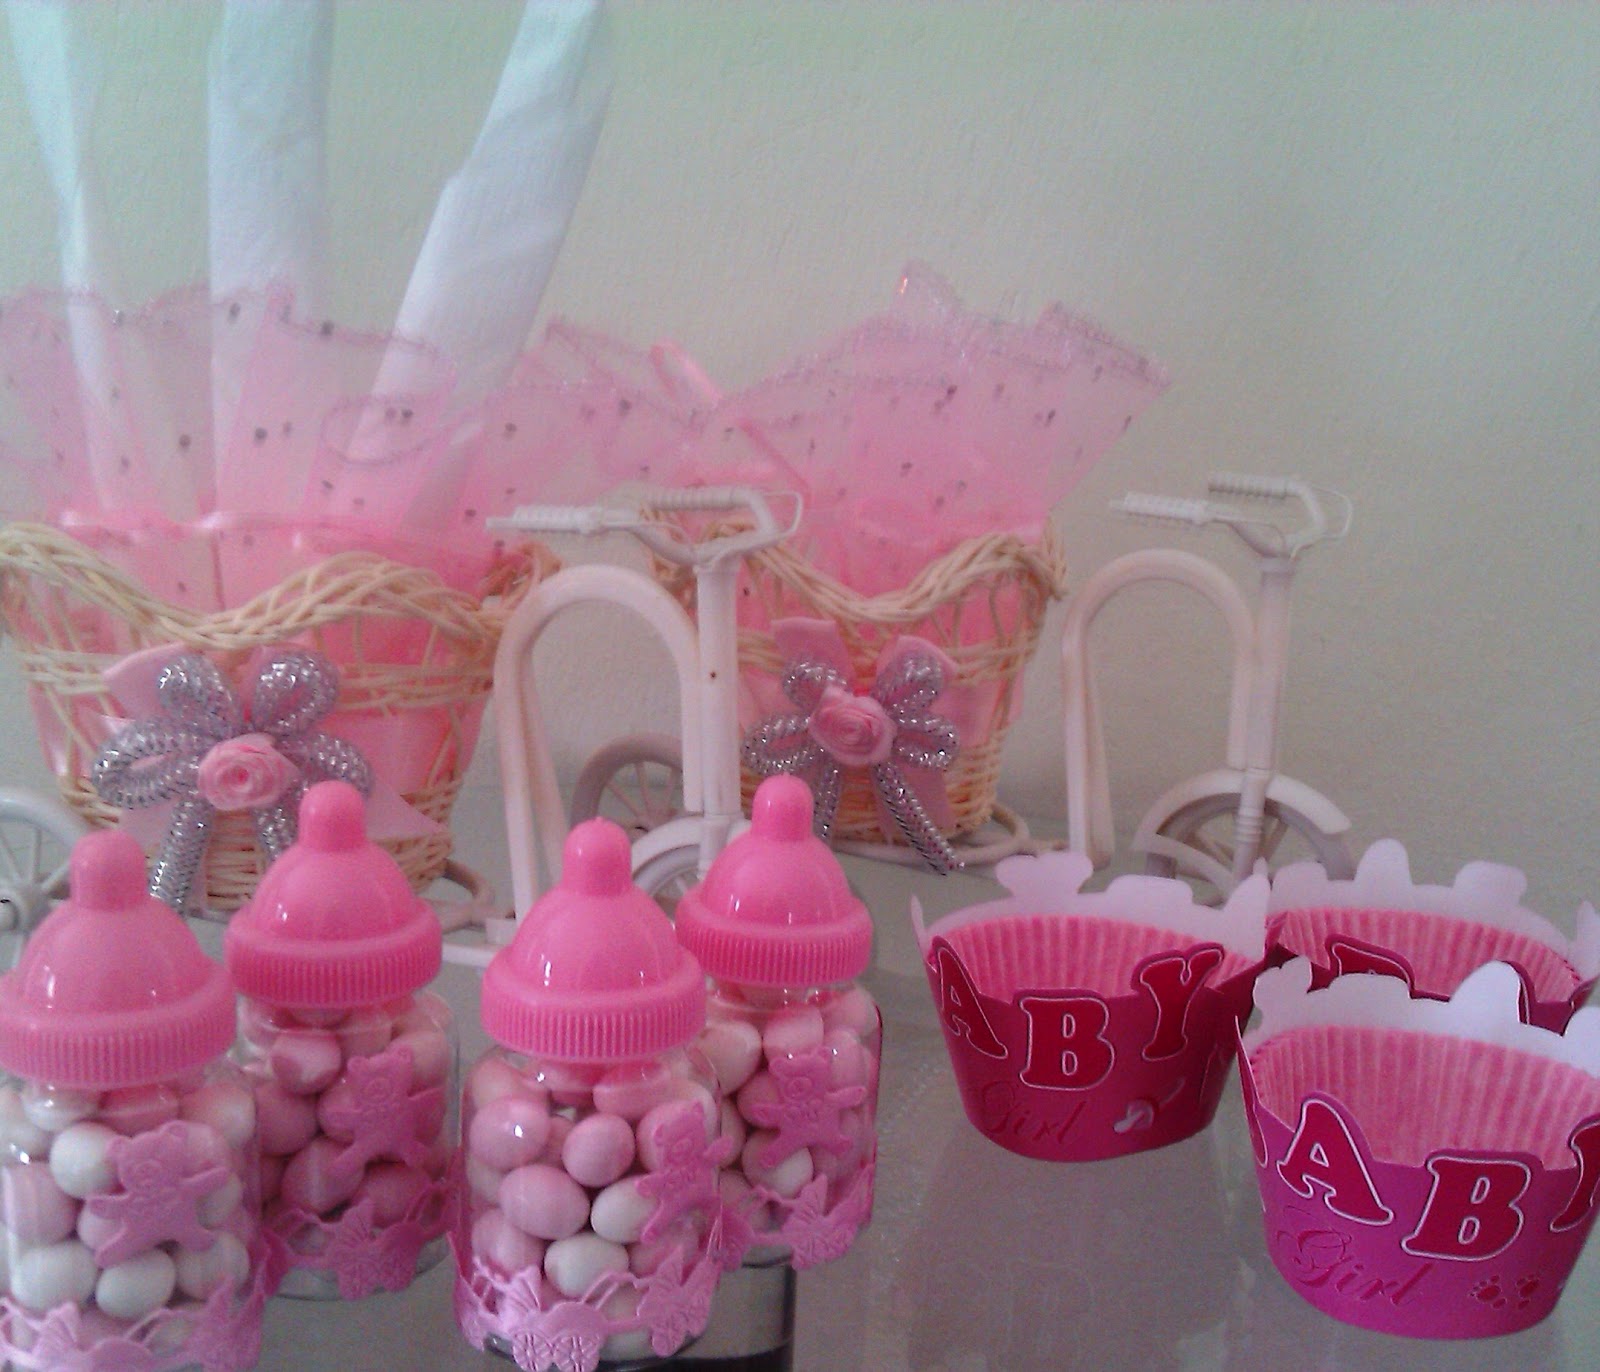 Full Size of Baby Shower:enamour Baby Shower Gifts For Guests Picture Ideas 43 Baby Shower Guest Gifts Ideas Baby Shower Gifts For Guest About 43 Baby Shower Guest Gifts Ideas Baby Shower Gifts For Guest About To Pop Baby Shower Kadokanet